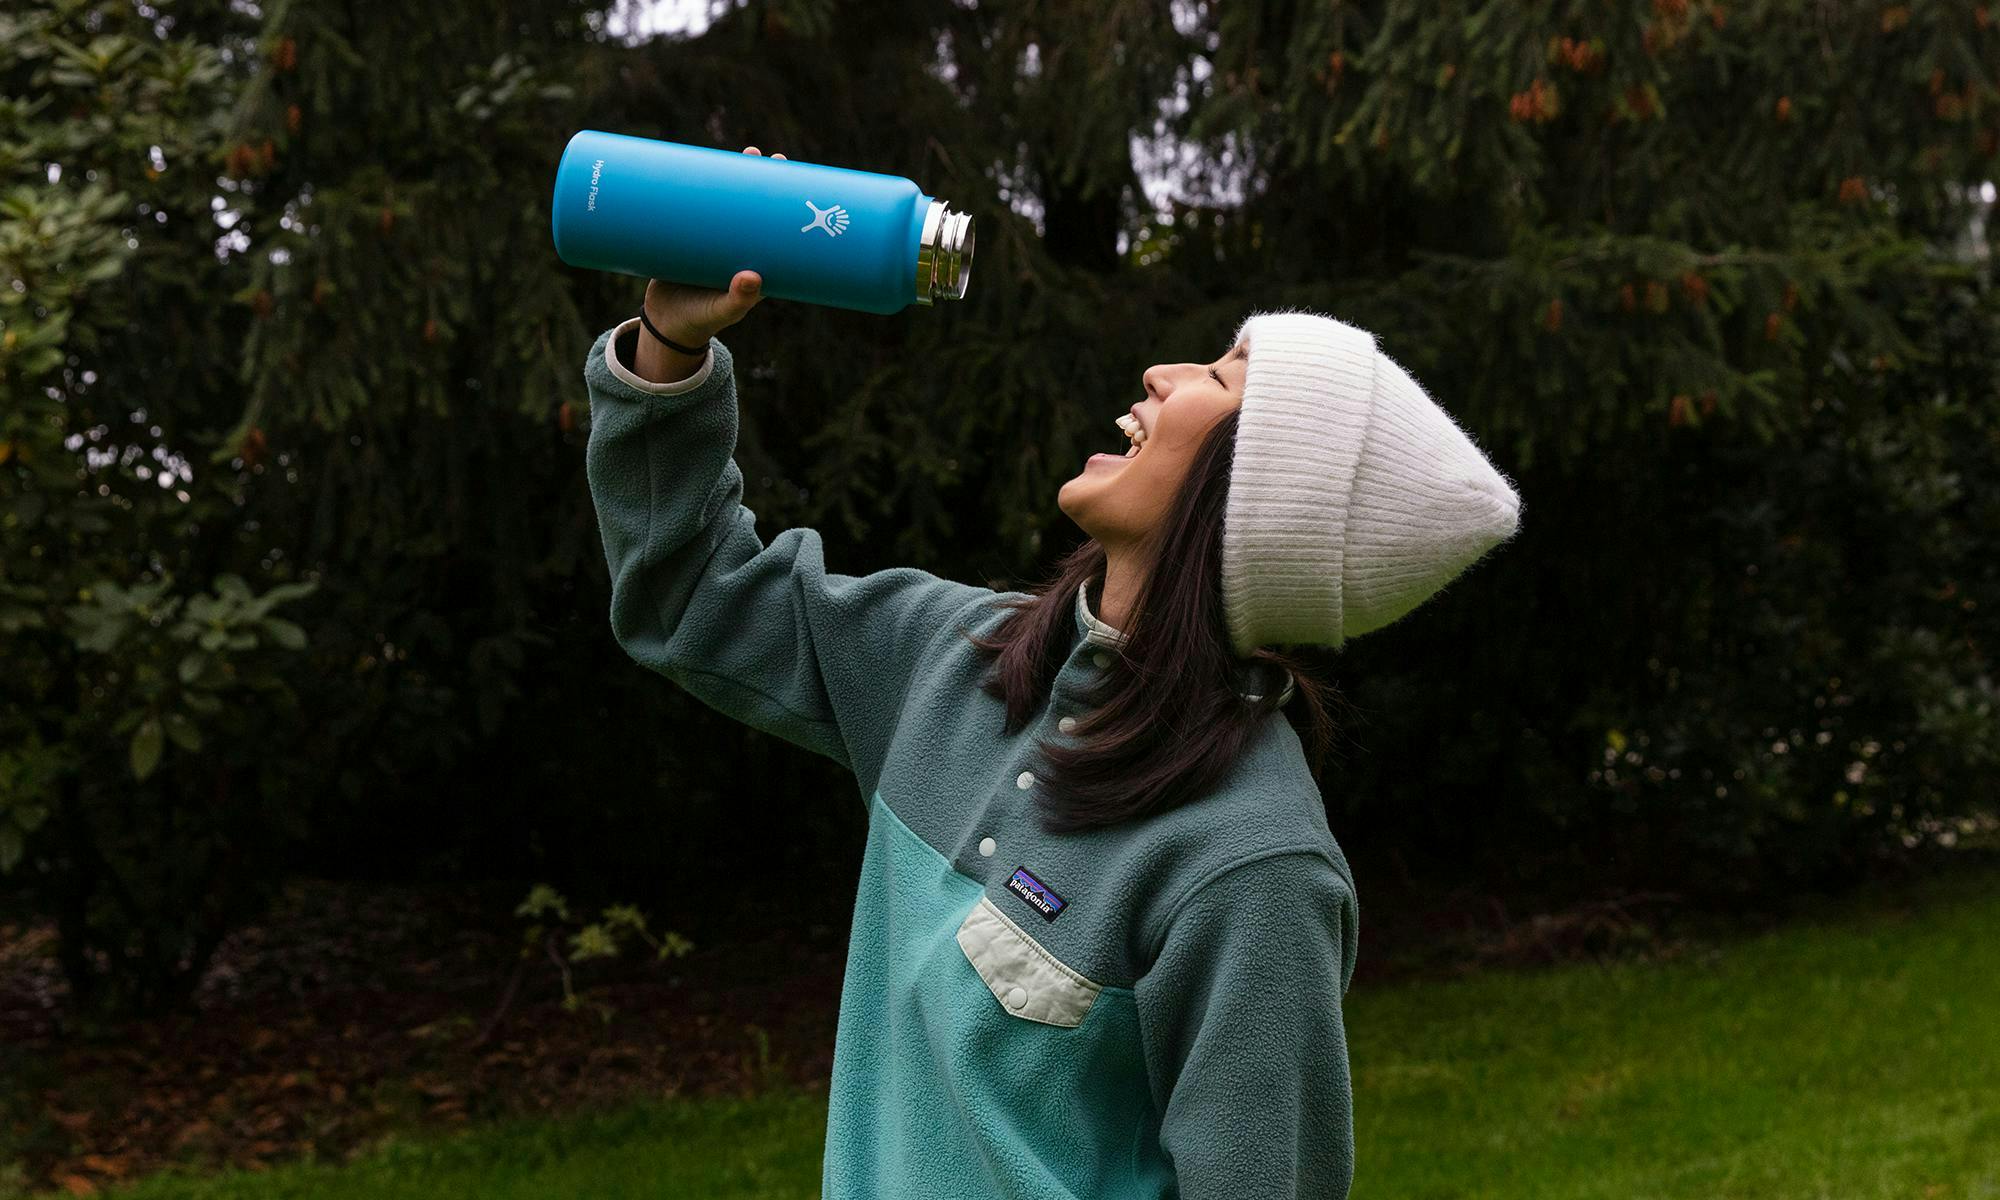 Cheena drinking out of a Hydroflask bottle